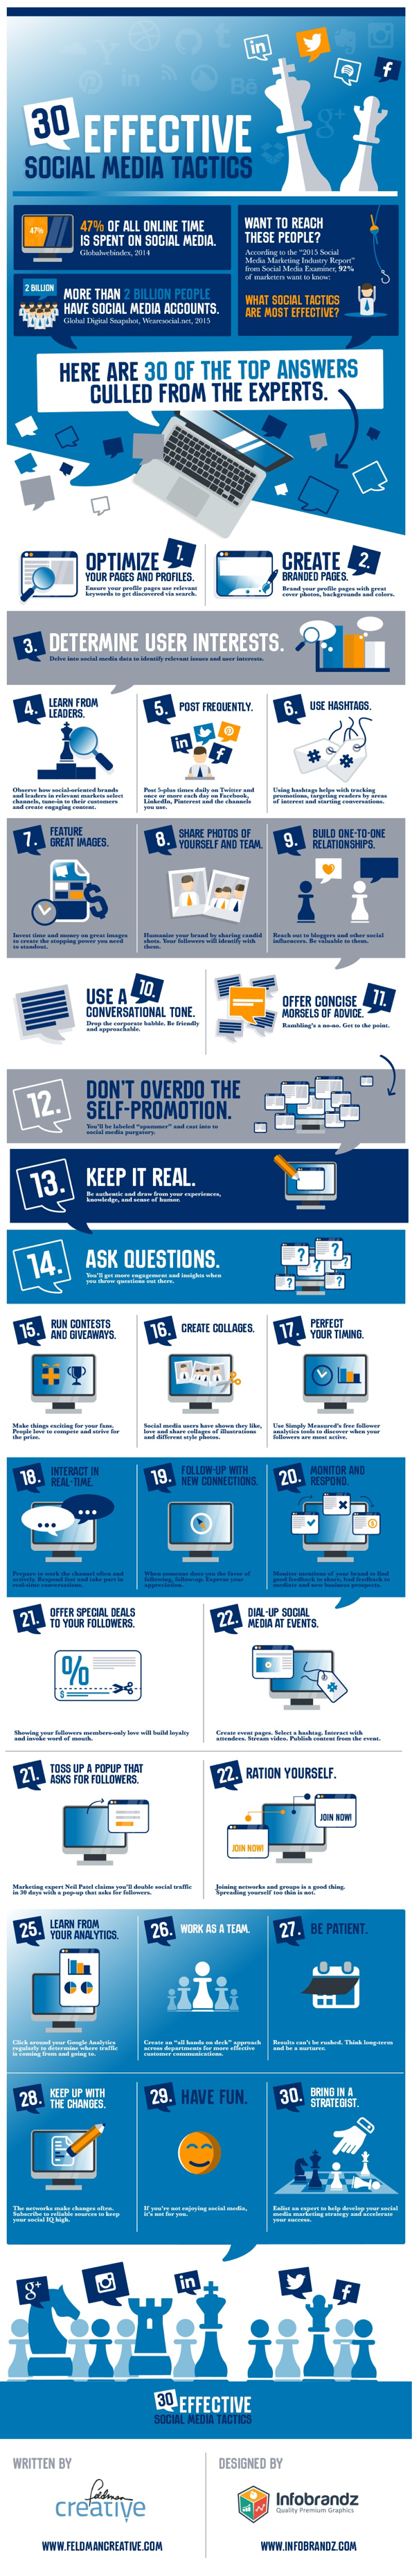 The 30 Most Effective Social Media Marketing Tactics Infographic image